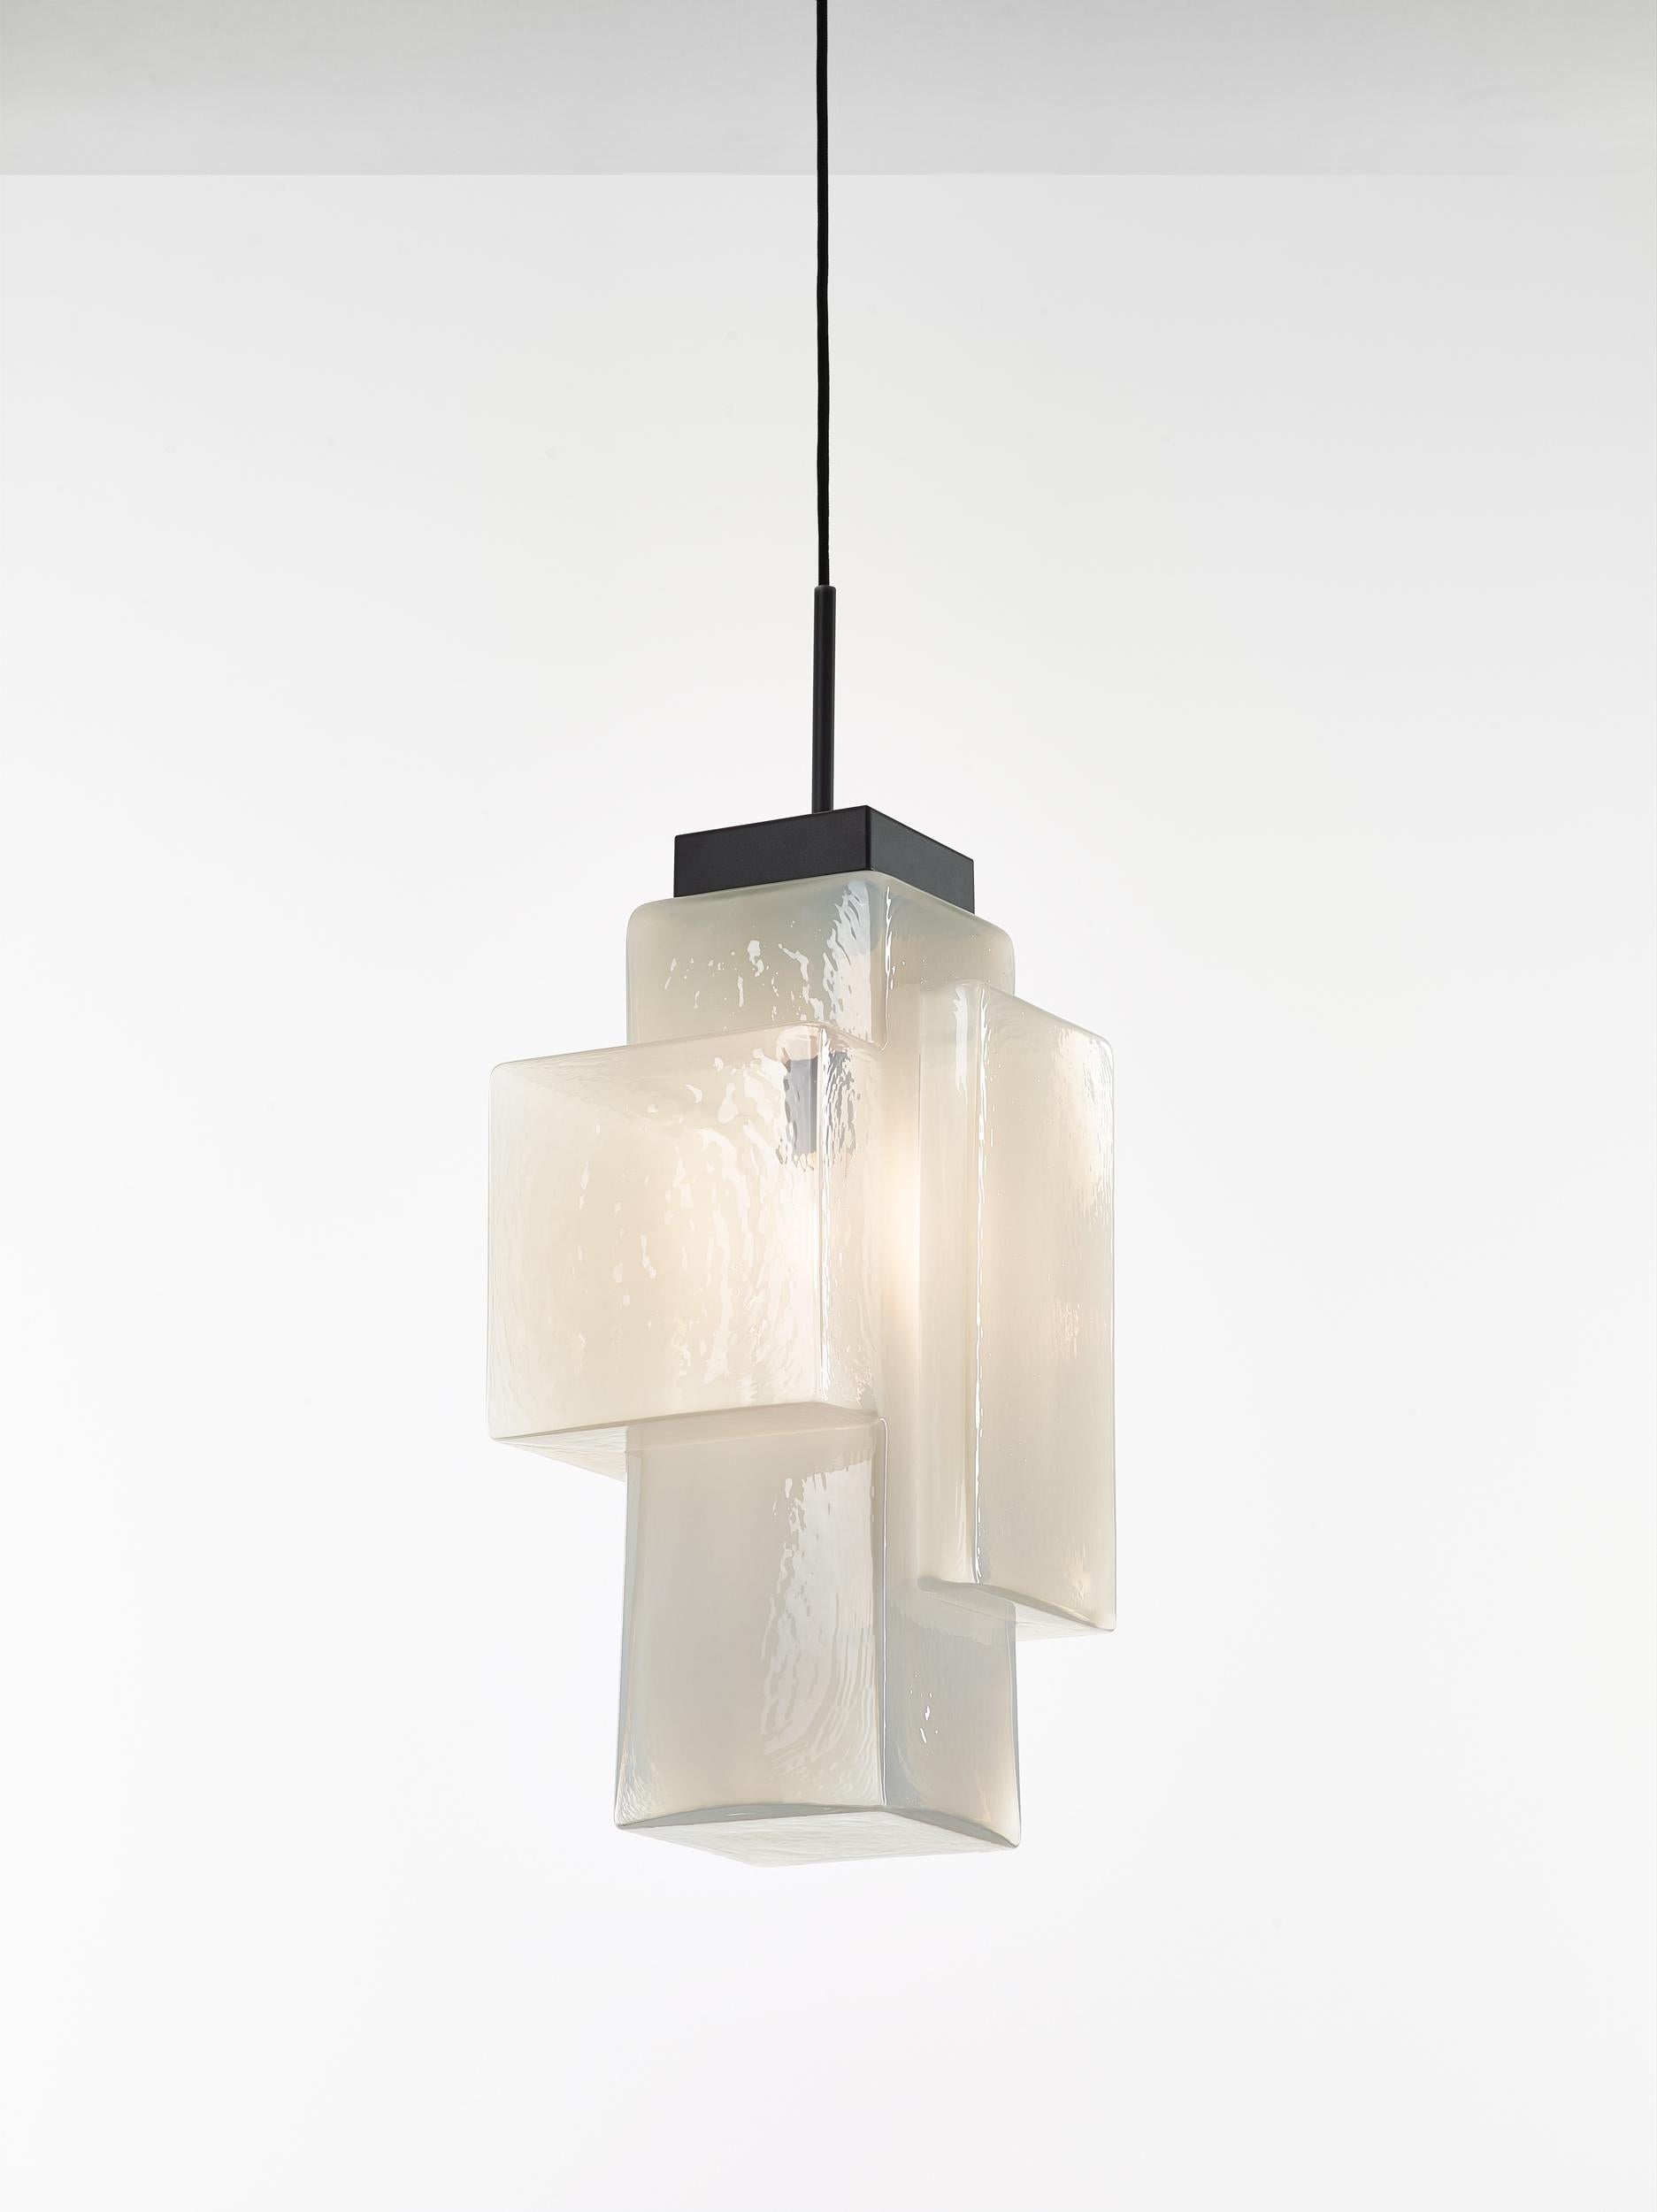 Set of 2 Alabaster white Tetris pendant light by Dechem Studio
Dimensions: W 30 x D 23 x H 200 cm
Materials: metal, glass.
Also available: different colours available.

In this complex lighting fixture, strict geometric and architectural lines